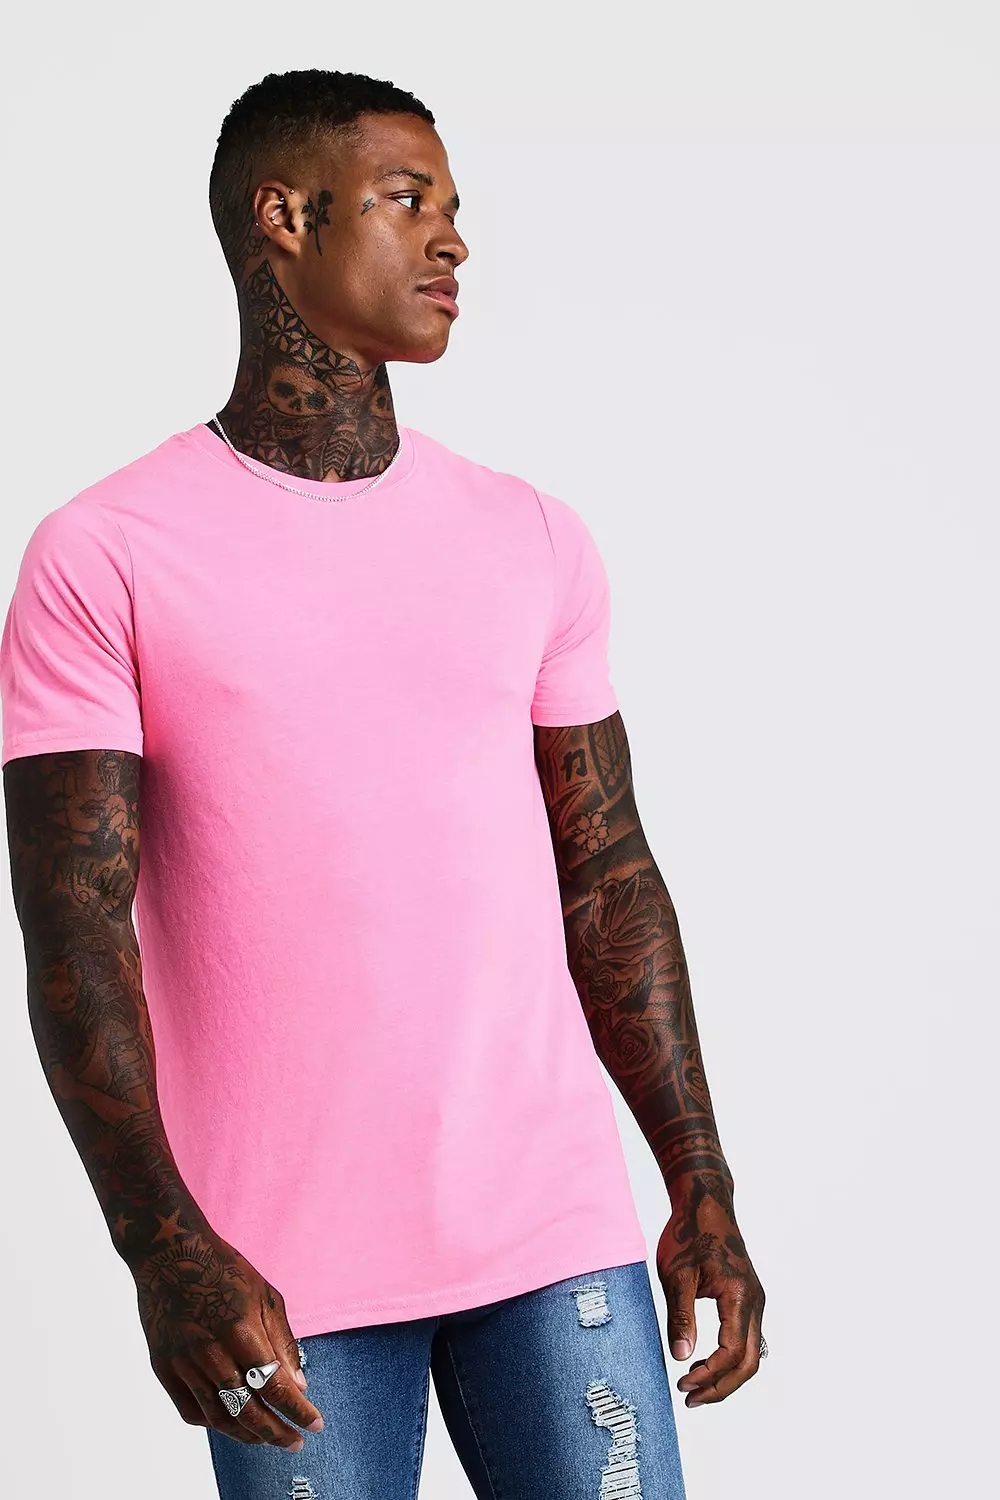 T-Shirt Men Rhinestone Pink Large Size 4XL Spring Personalized Trend High  Quality Short Sleeve Round Neck Tees New 2021 Male Top